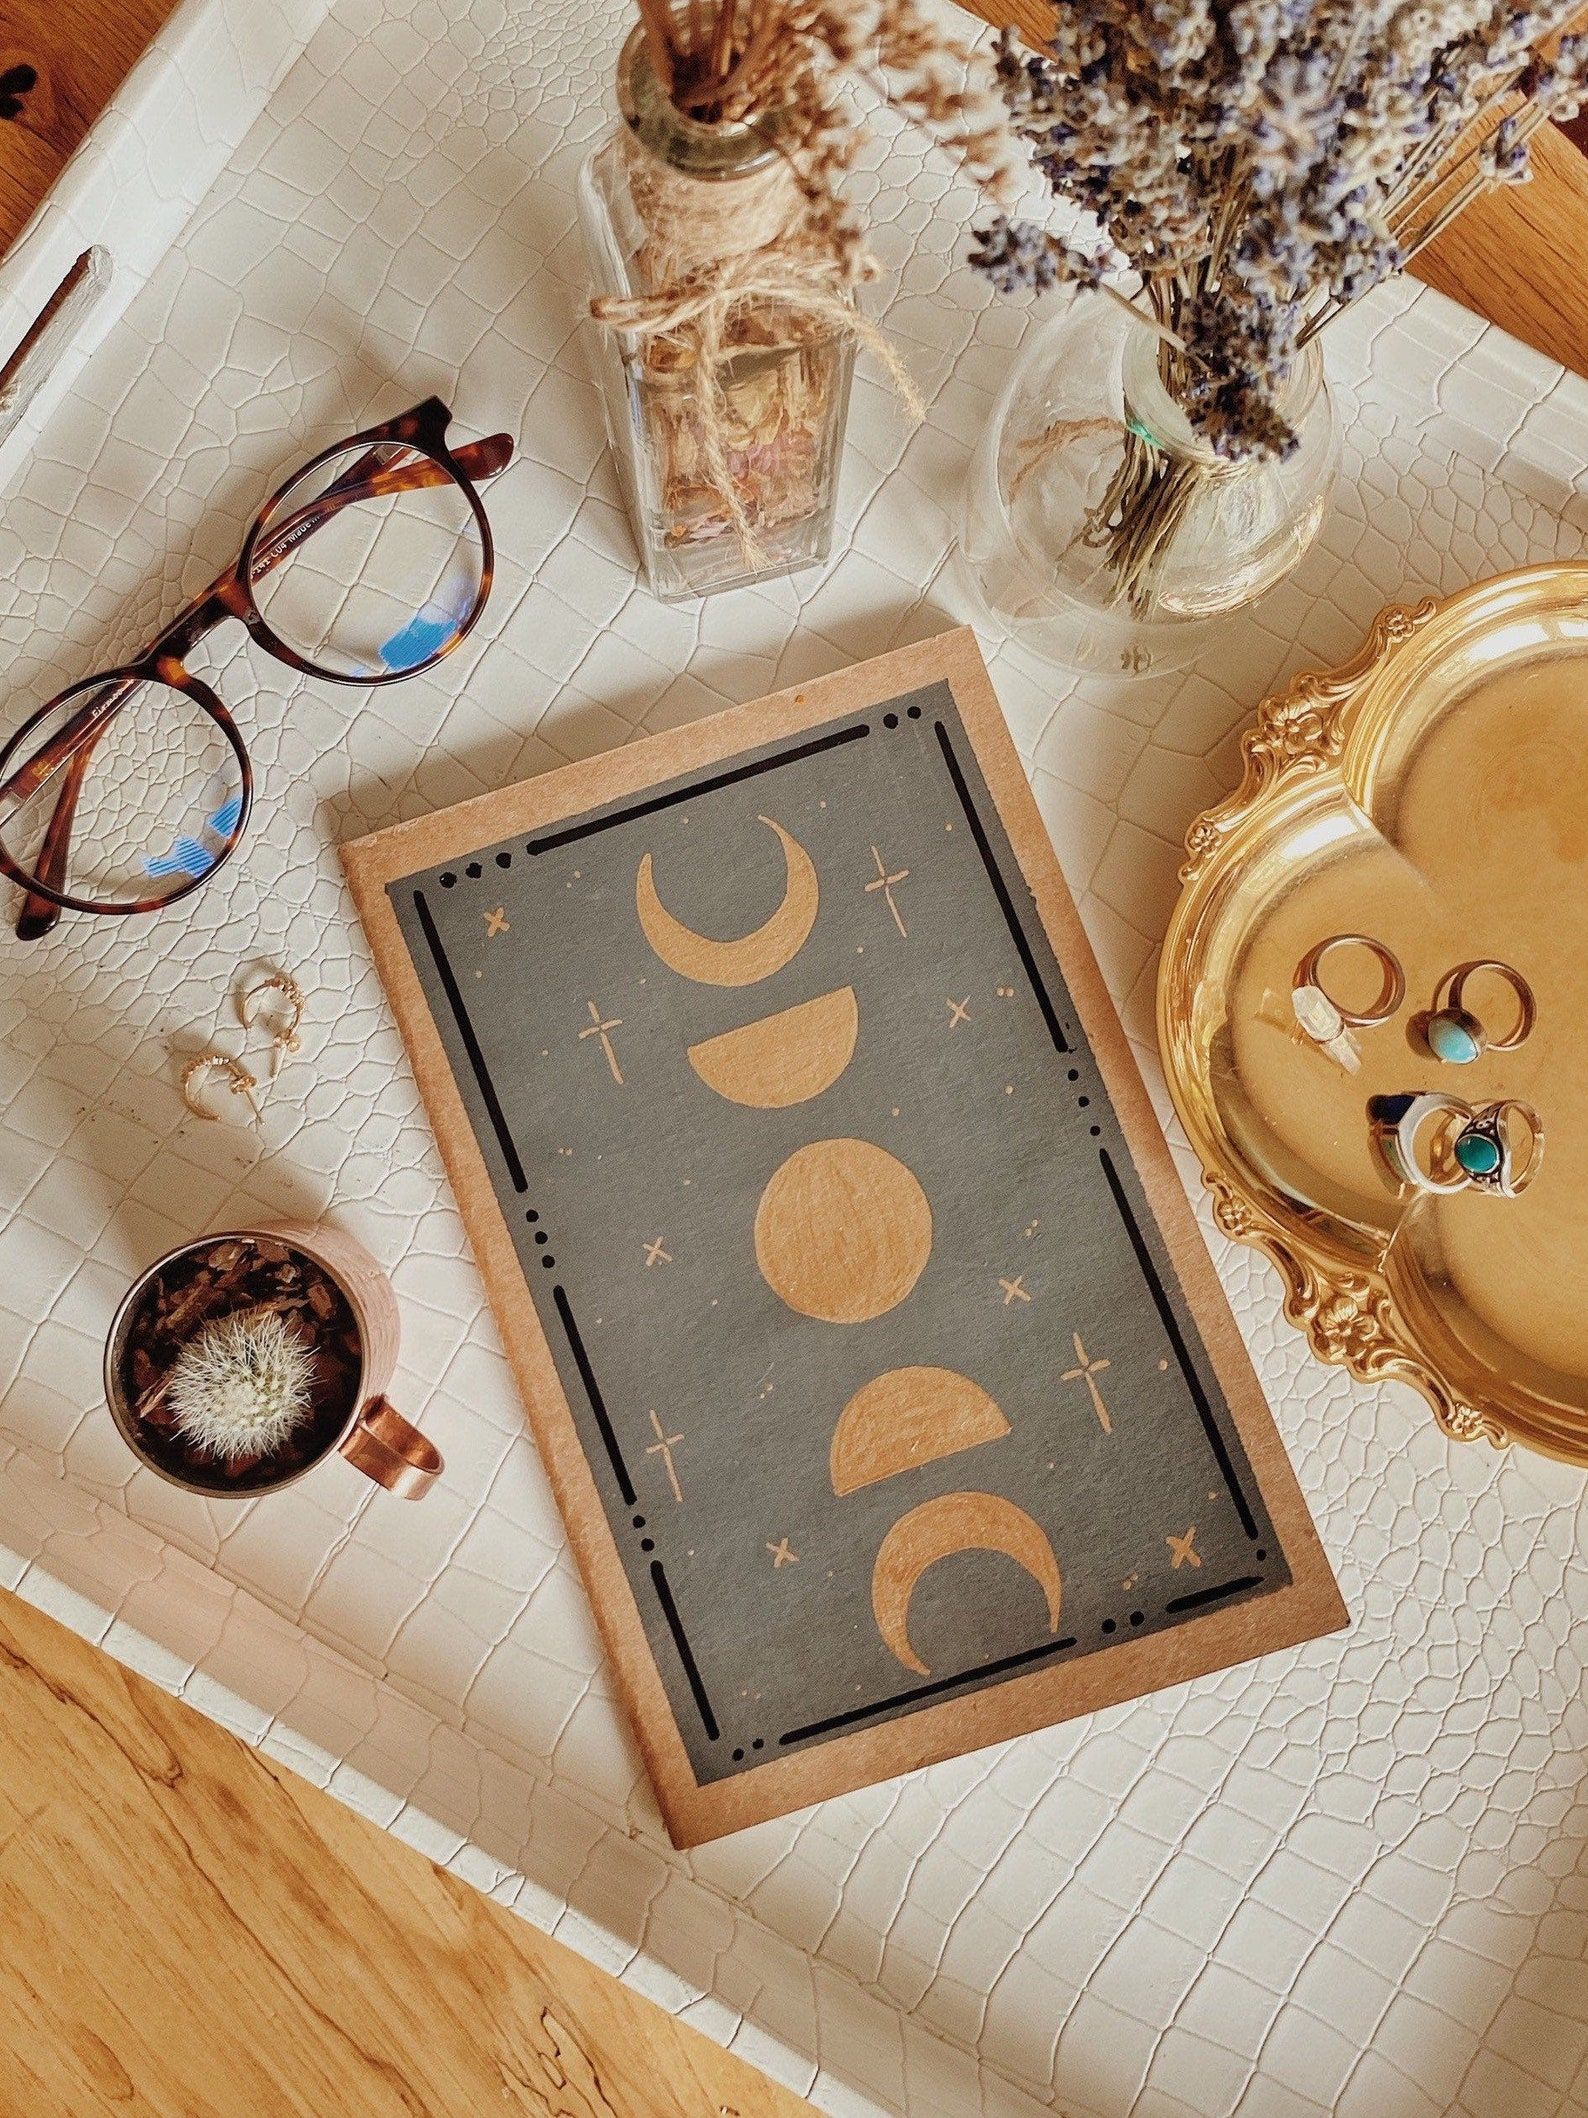 Image of a journal with moon phases on the cover. It's on a tray with jewelry, a cactus, and eye glasses. 